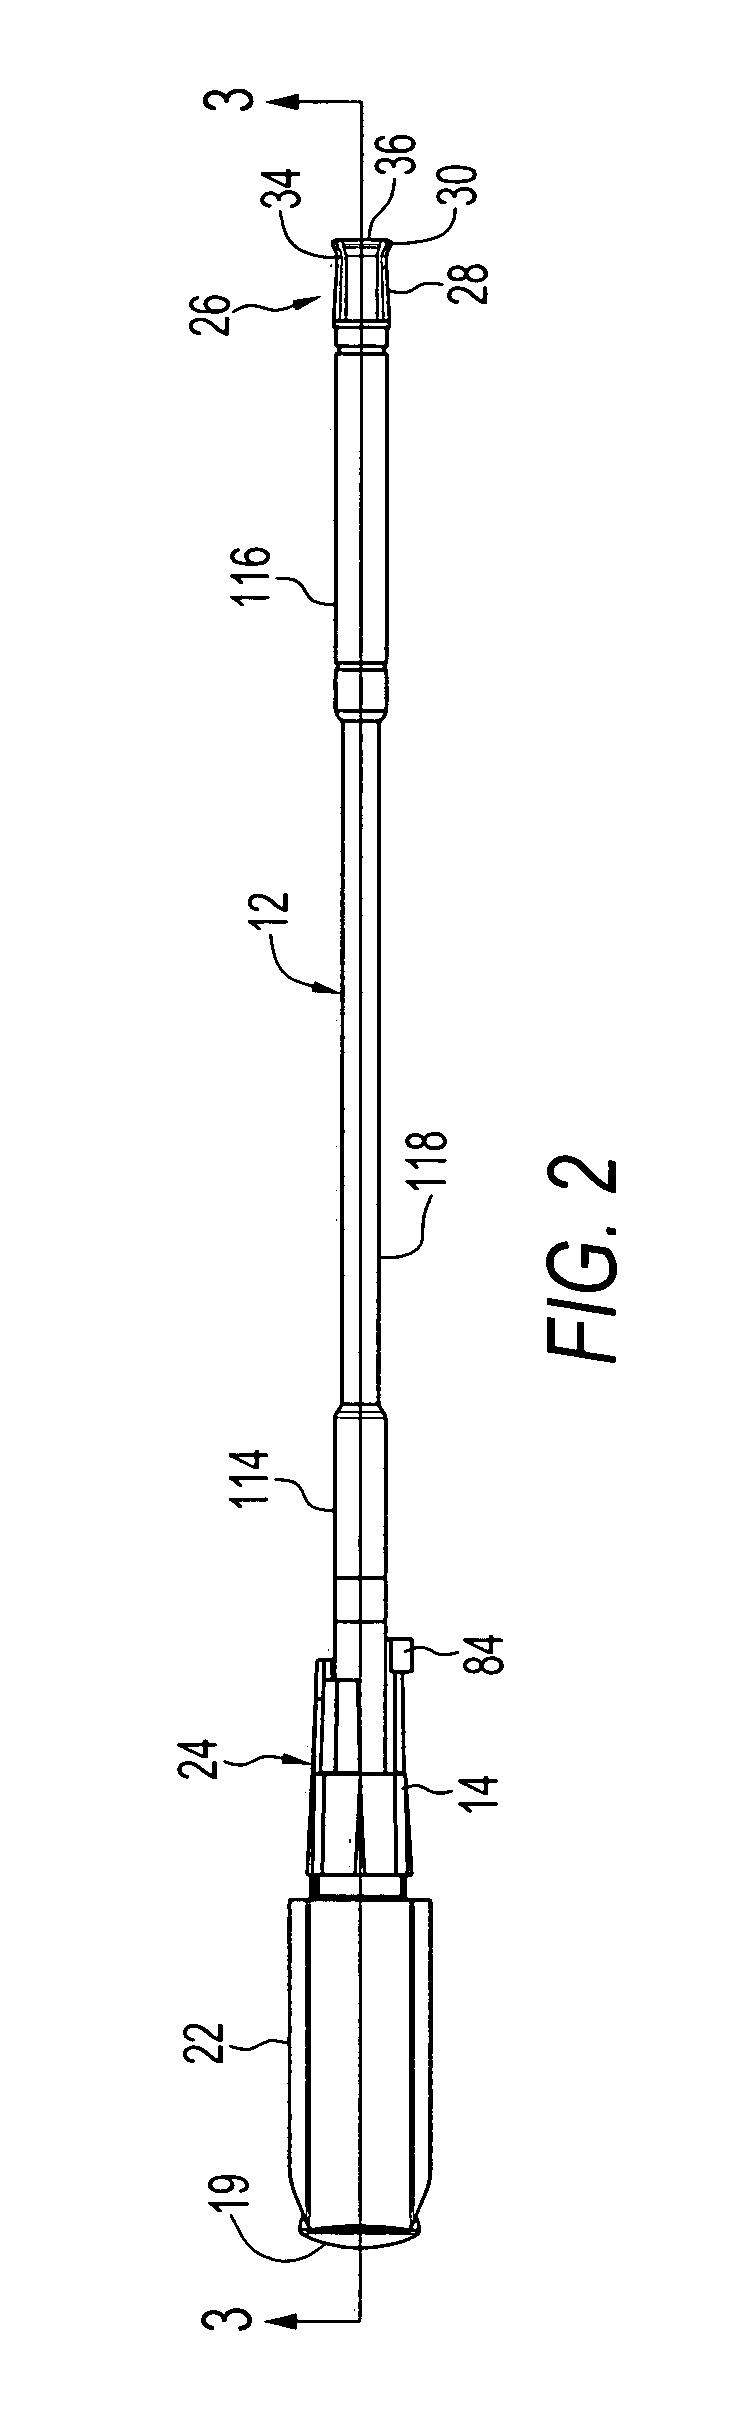 Clipped contact whip and flex antenna assembly for a device